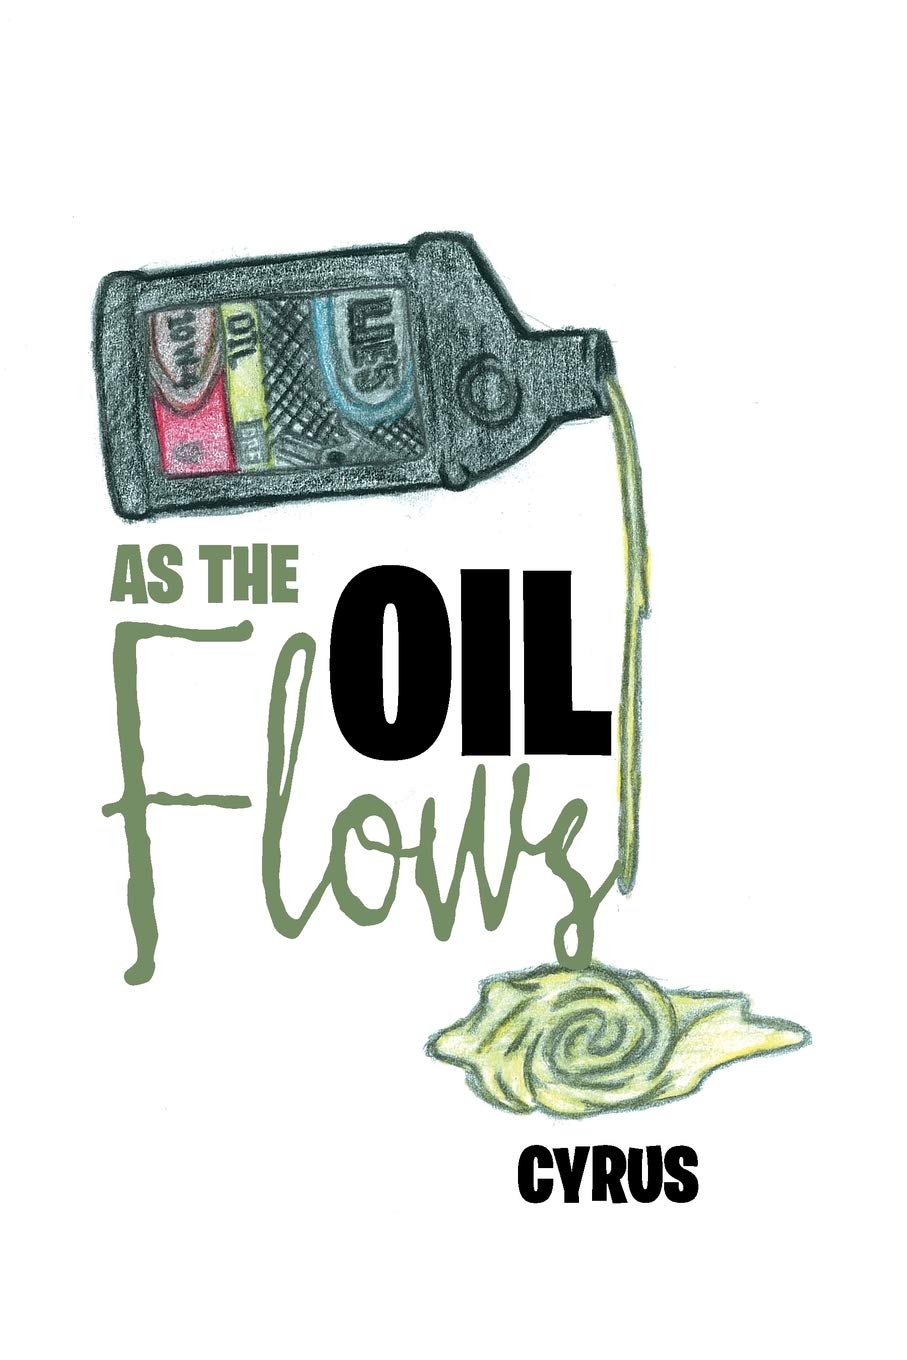 Author's Tranquility Press Presents "As the Oil Flows" - An Eye-Opening Fictional Tale of Corporate Corruption and Deceit